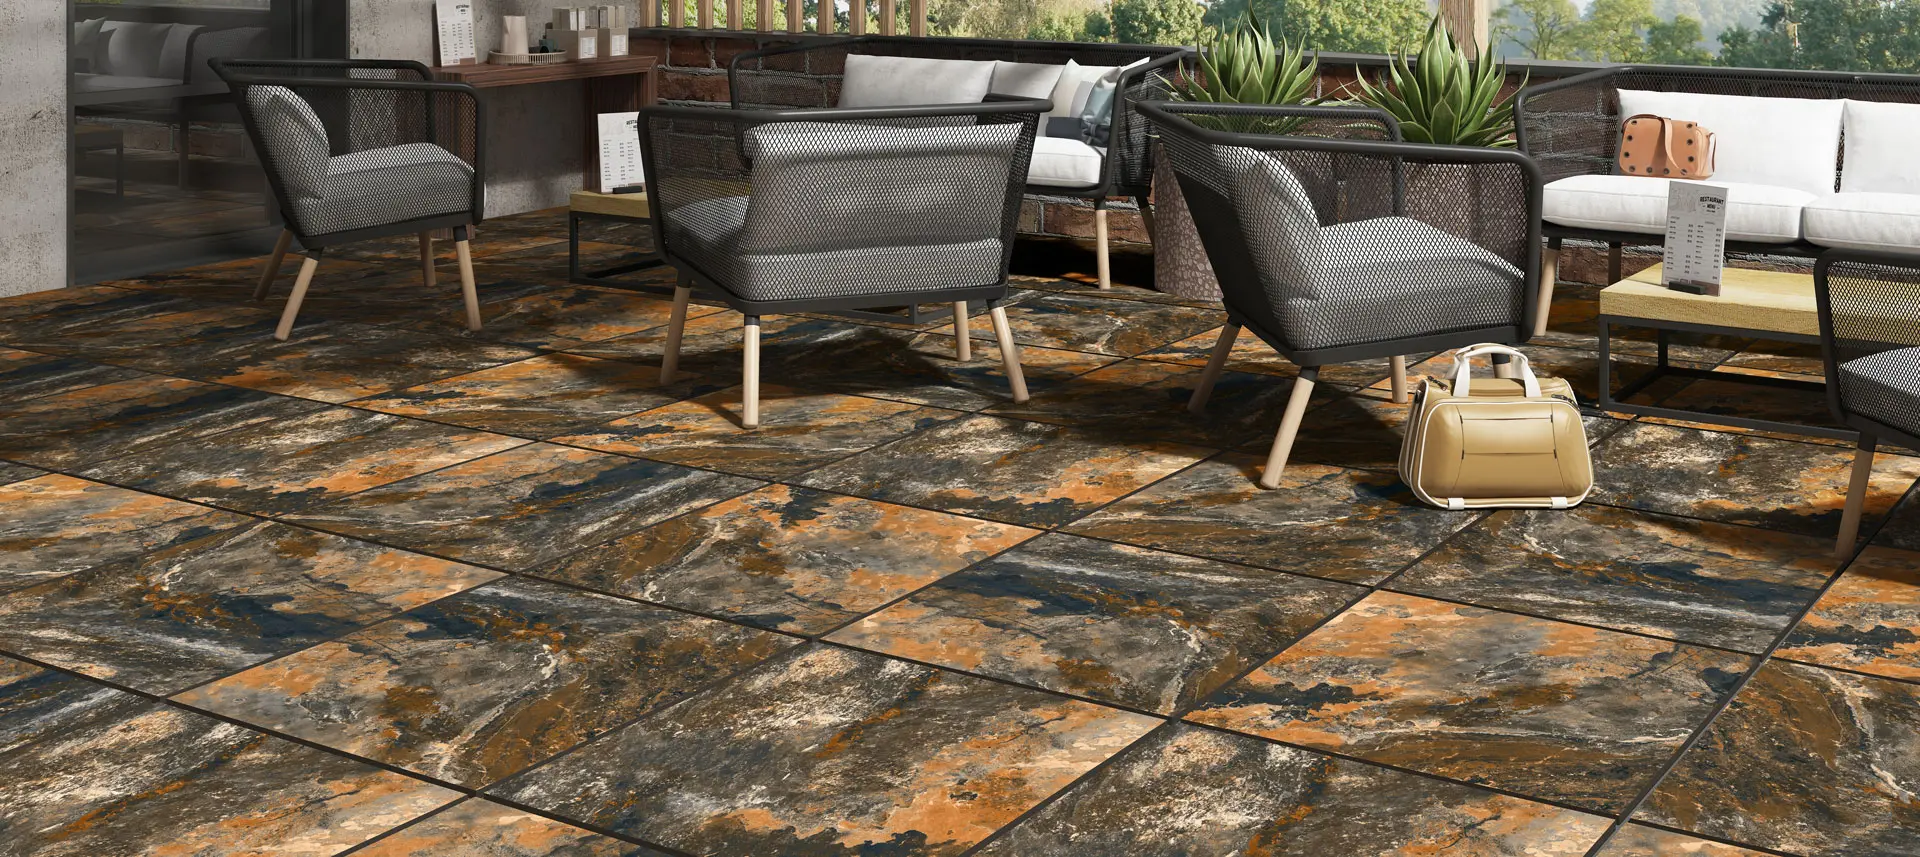 Natural Stone Look Tiles Flooring In 60x60cm Size | Graystone Ceramic